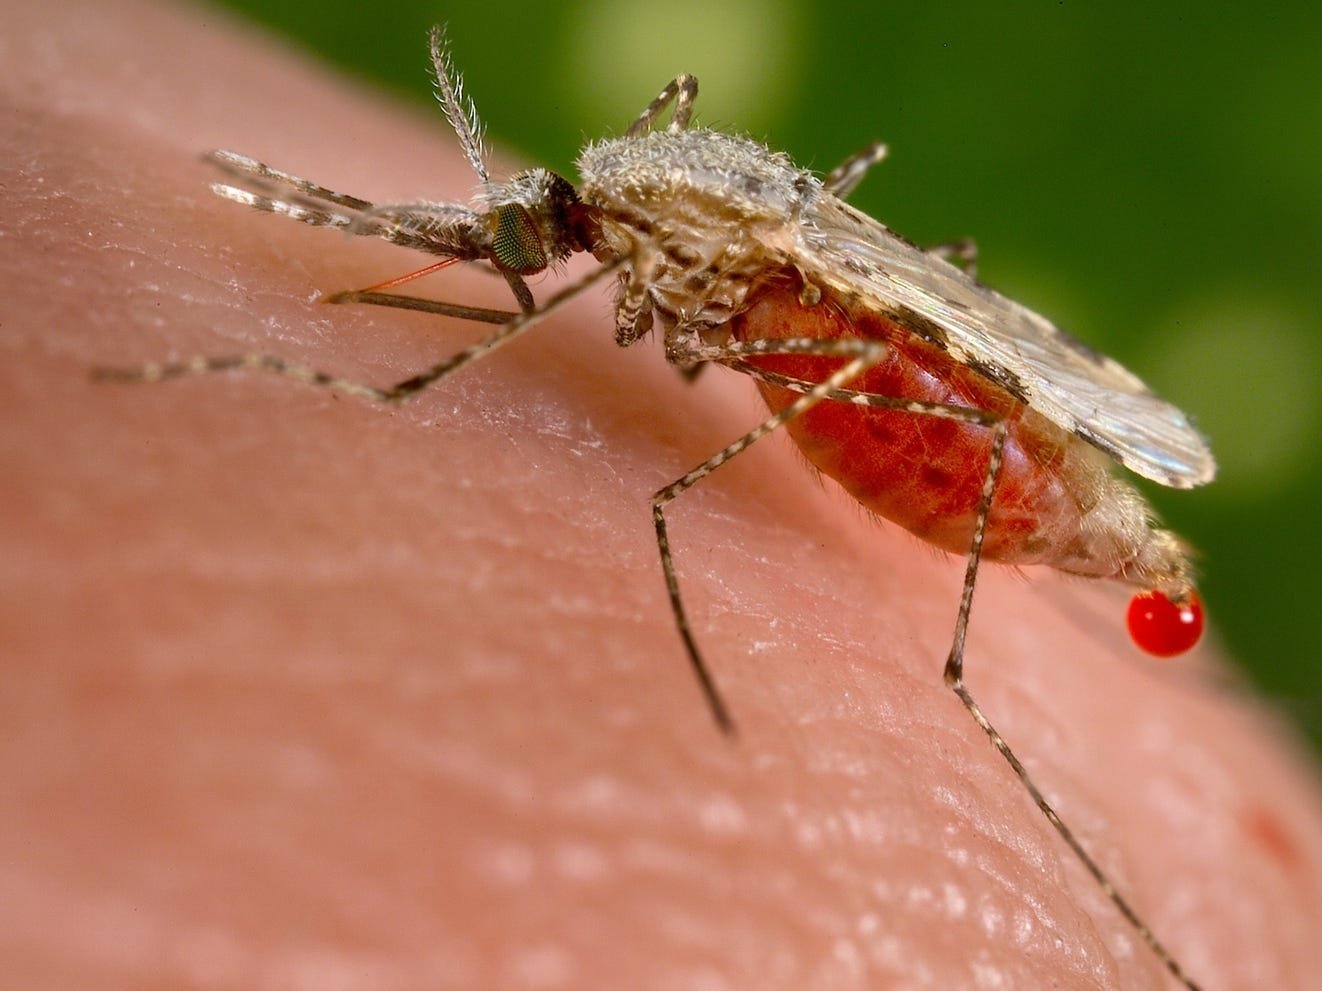 An Anopheles stephensi mosquito — a known vector of malaria — sucks blood from a human host through its pointed proboscis.